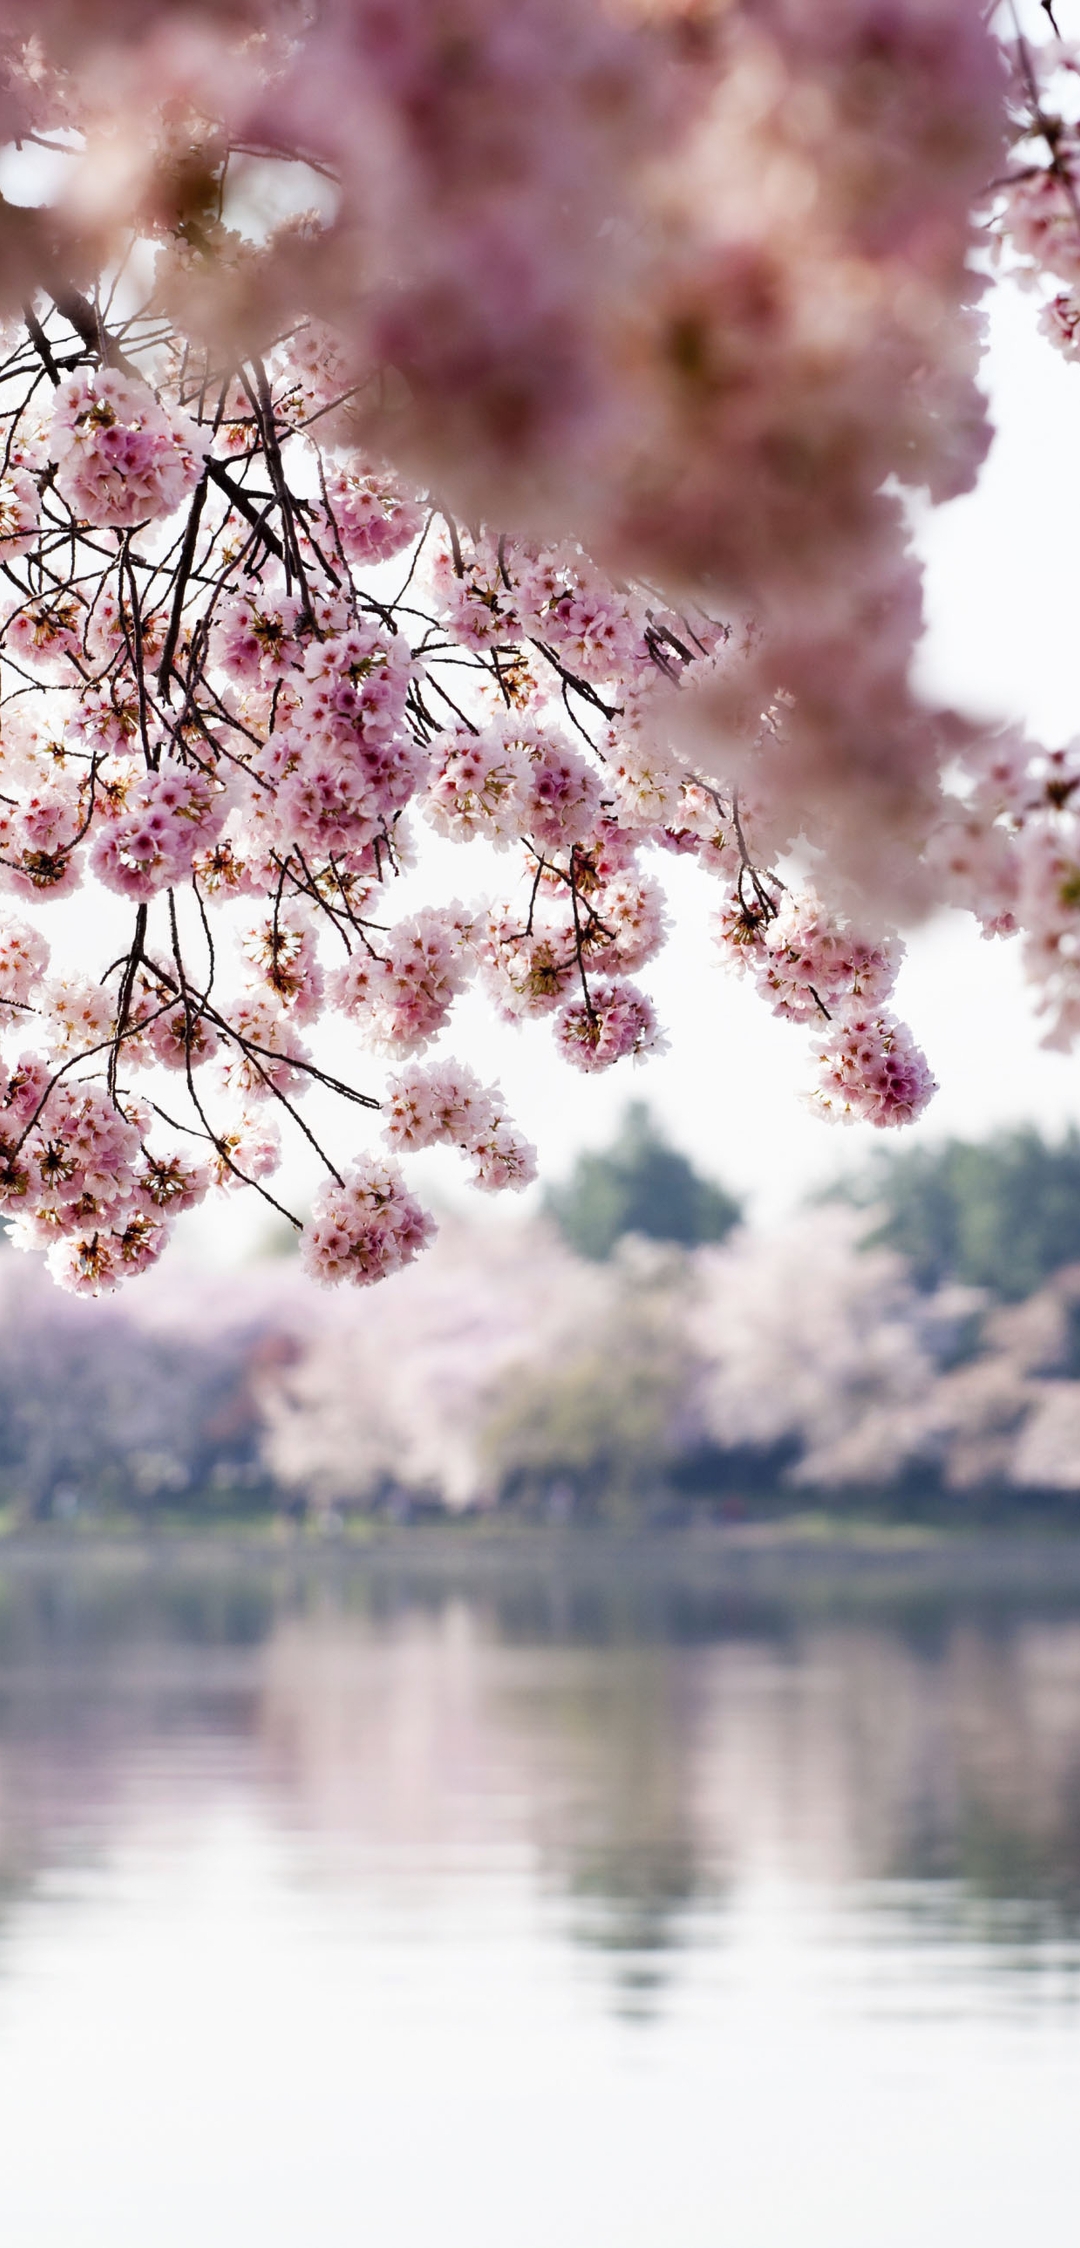 Image: River, water, apple, bloom, flowers, branches, reflection, trees, spring